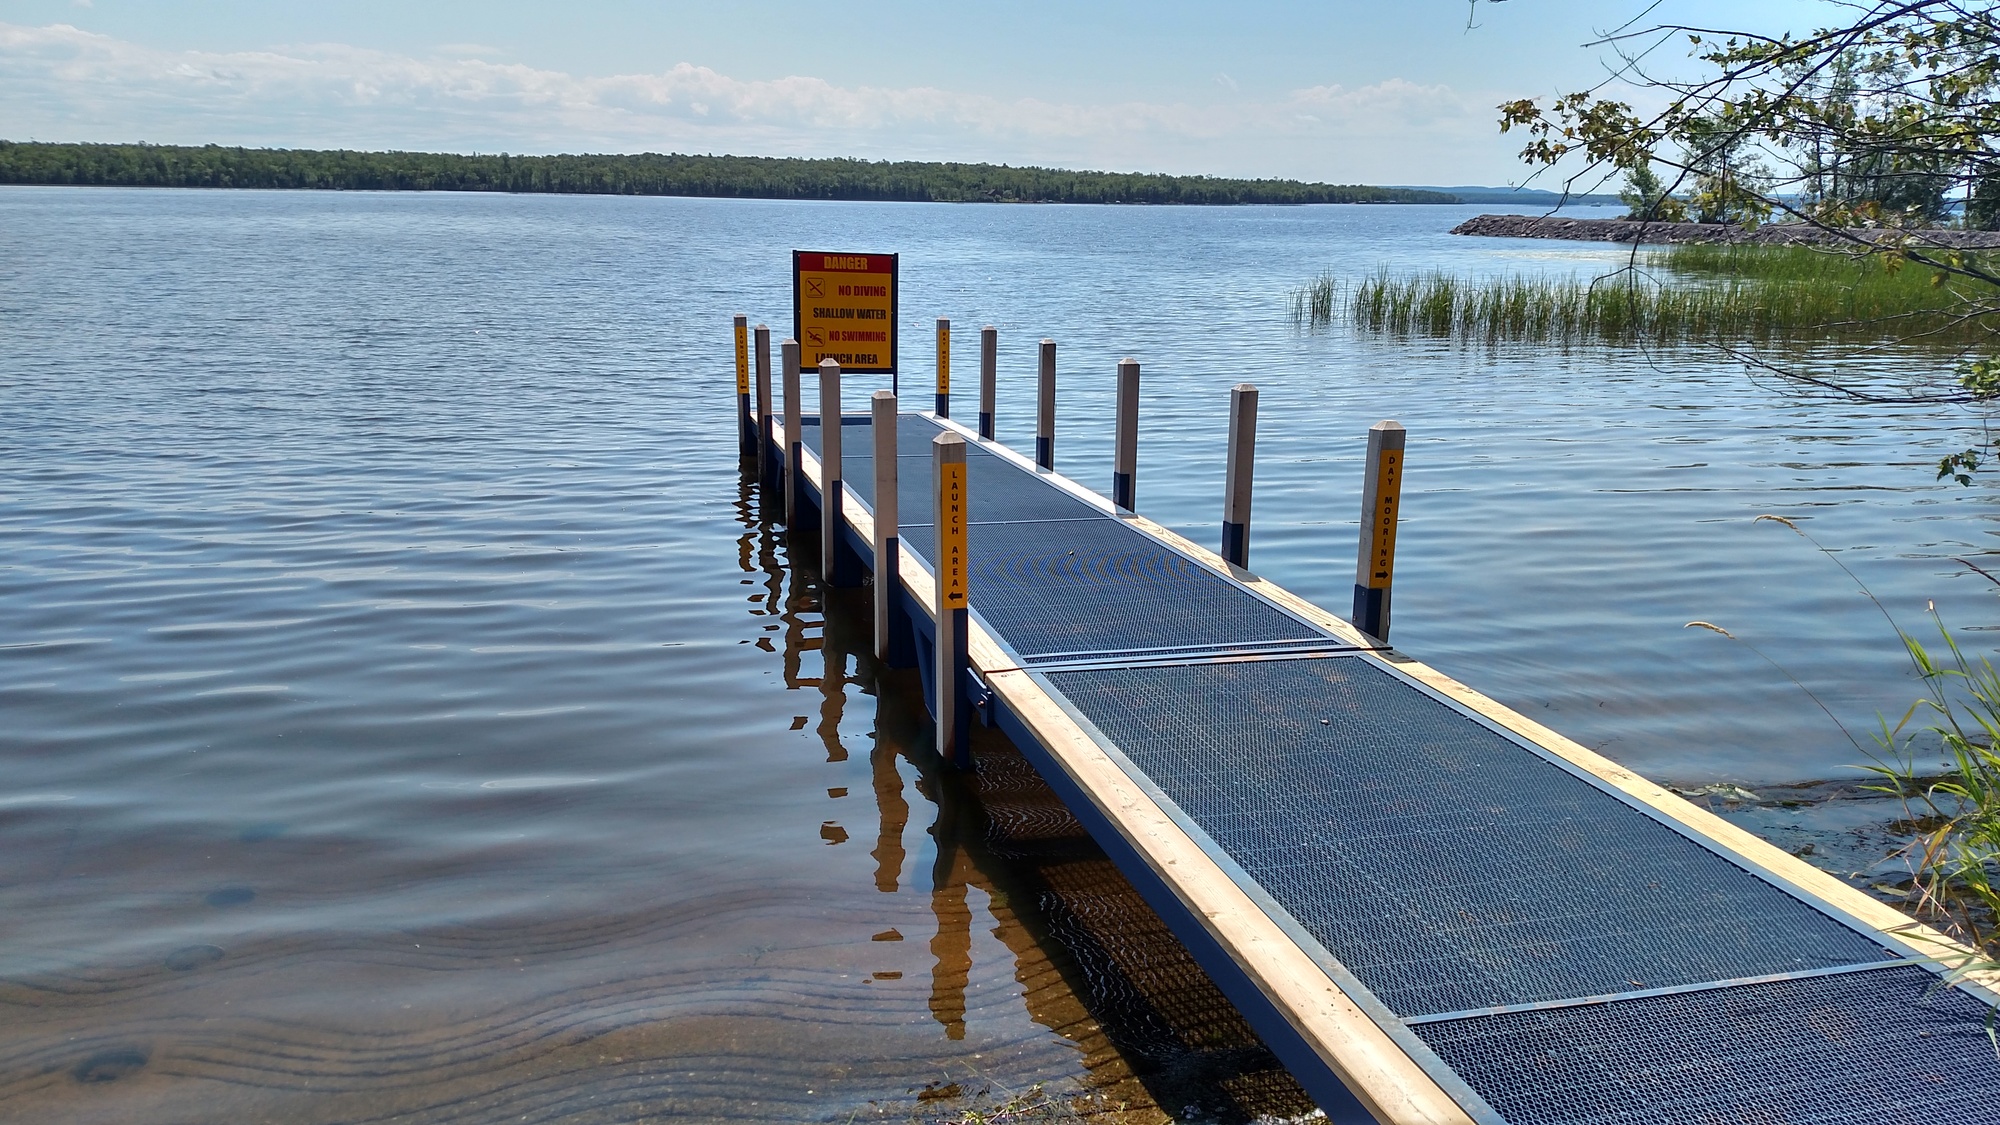 The Michigan DNR's Bergland Dock boating access site in Ontonagon County recently underwent improvements and has reopened.